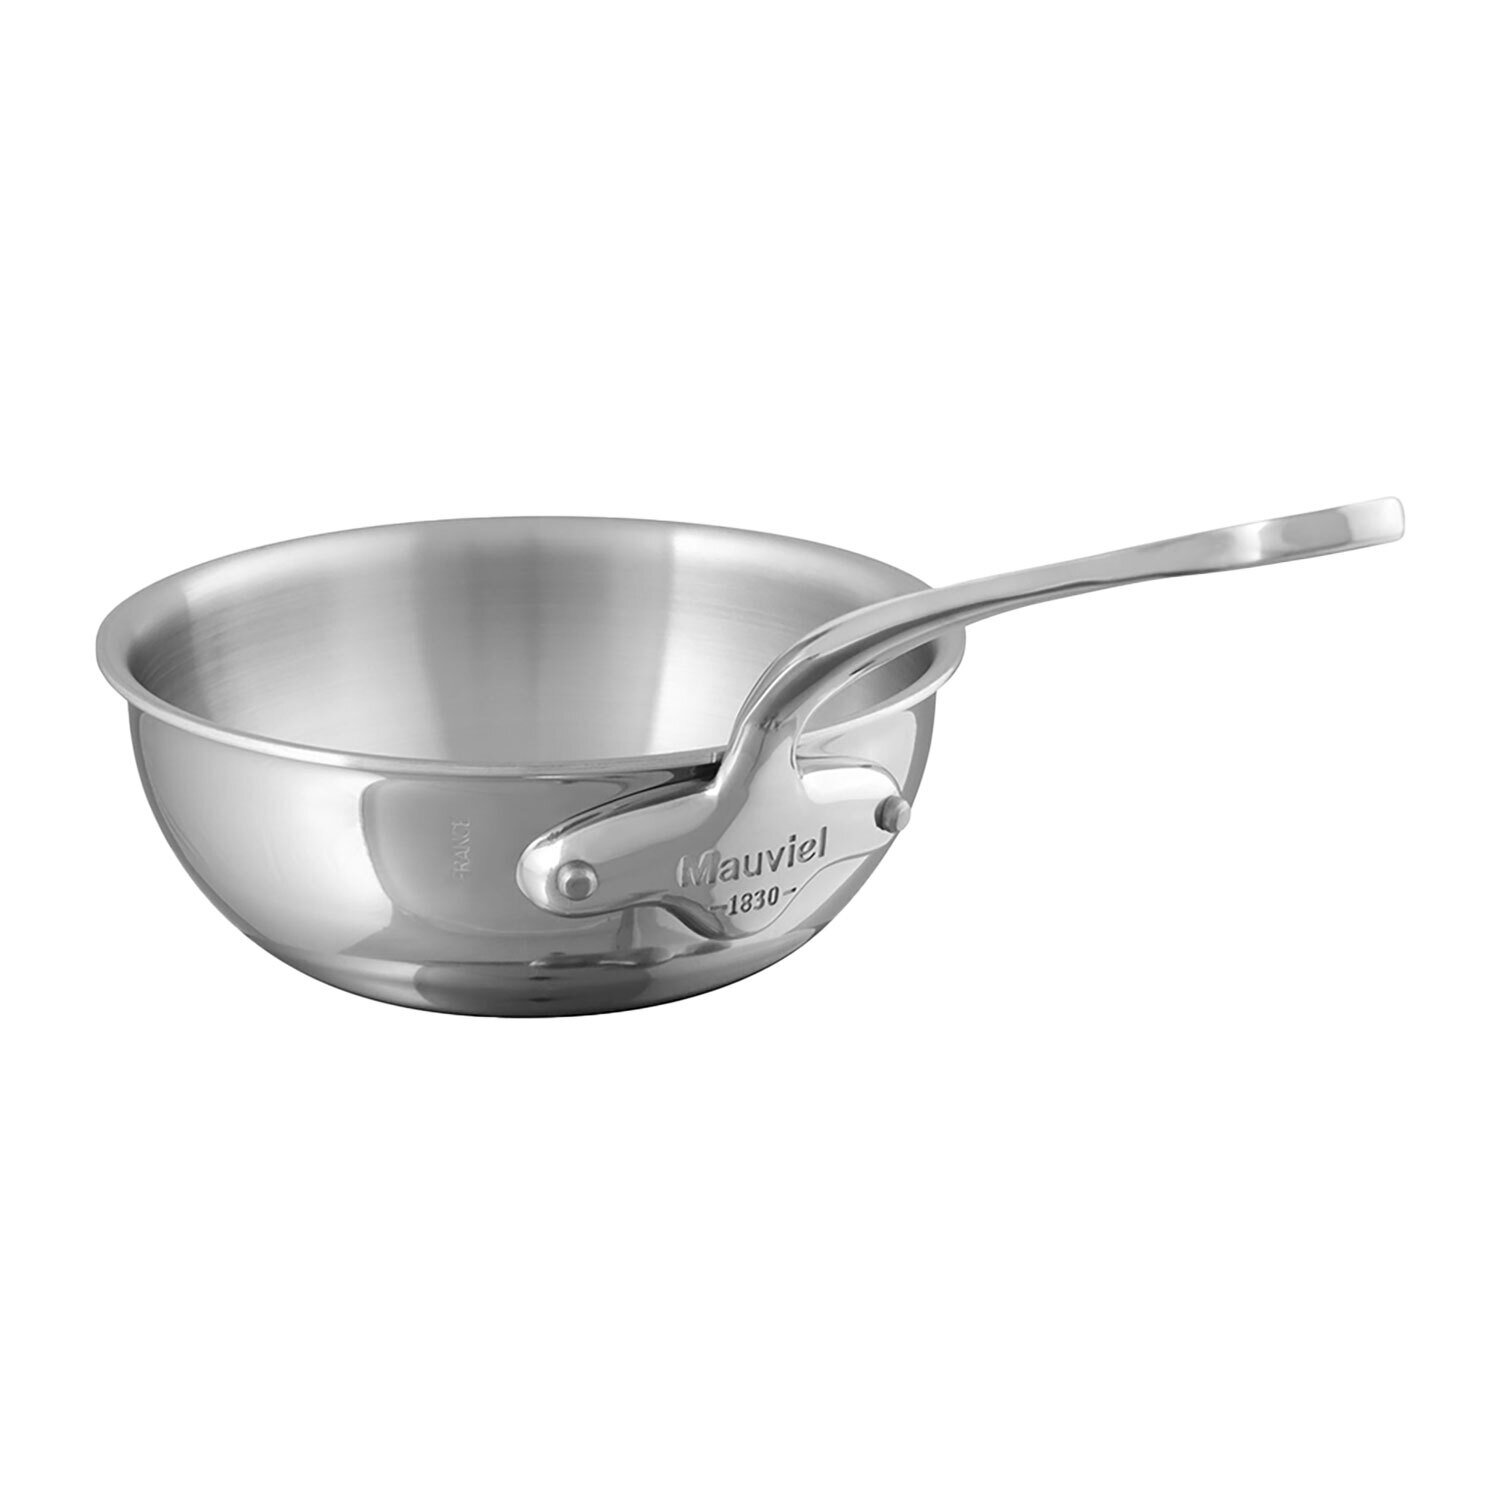 Mauviel M'Cook Curved Splayed Saute Pan 20cm 521220